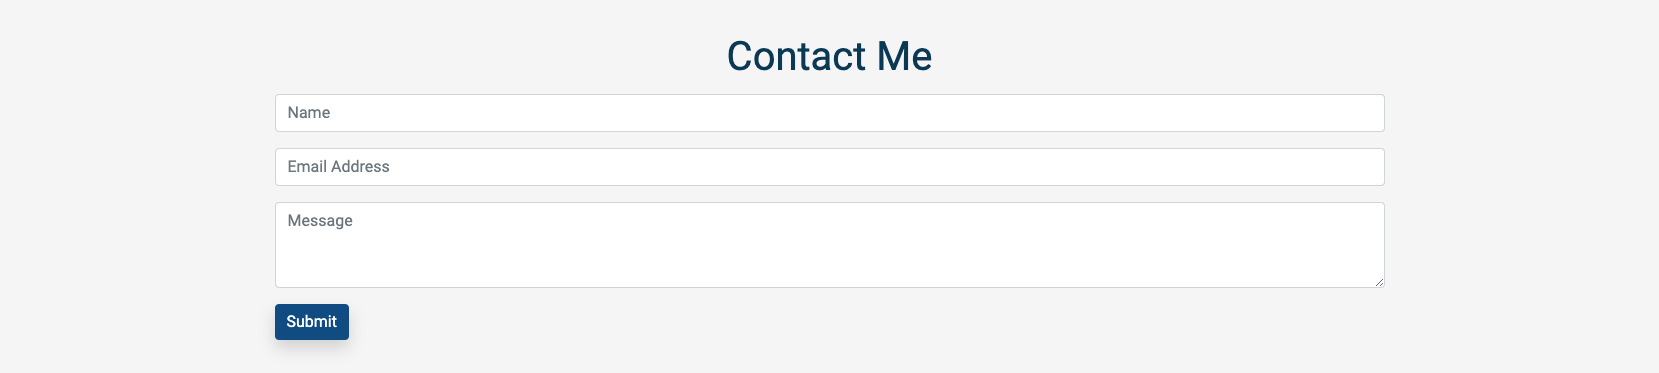 contactme.png